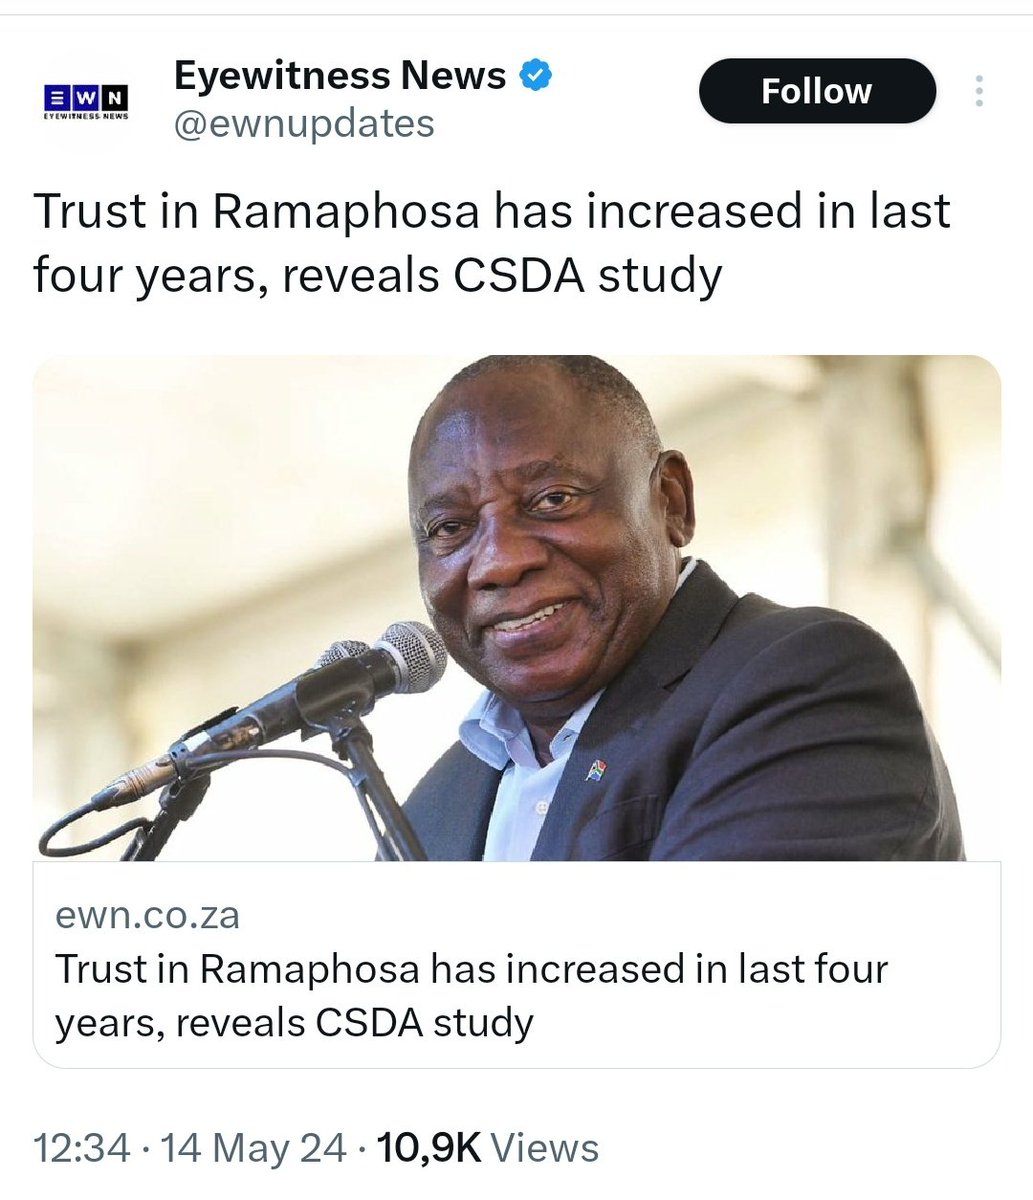 Stellenbosch Media doing damage control for the Anc of Ramaphosa 😅